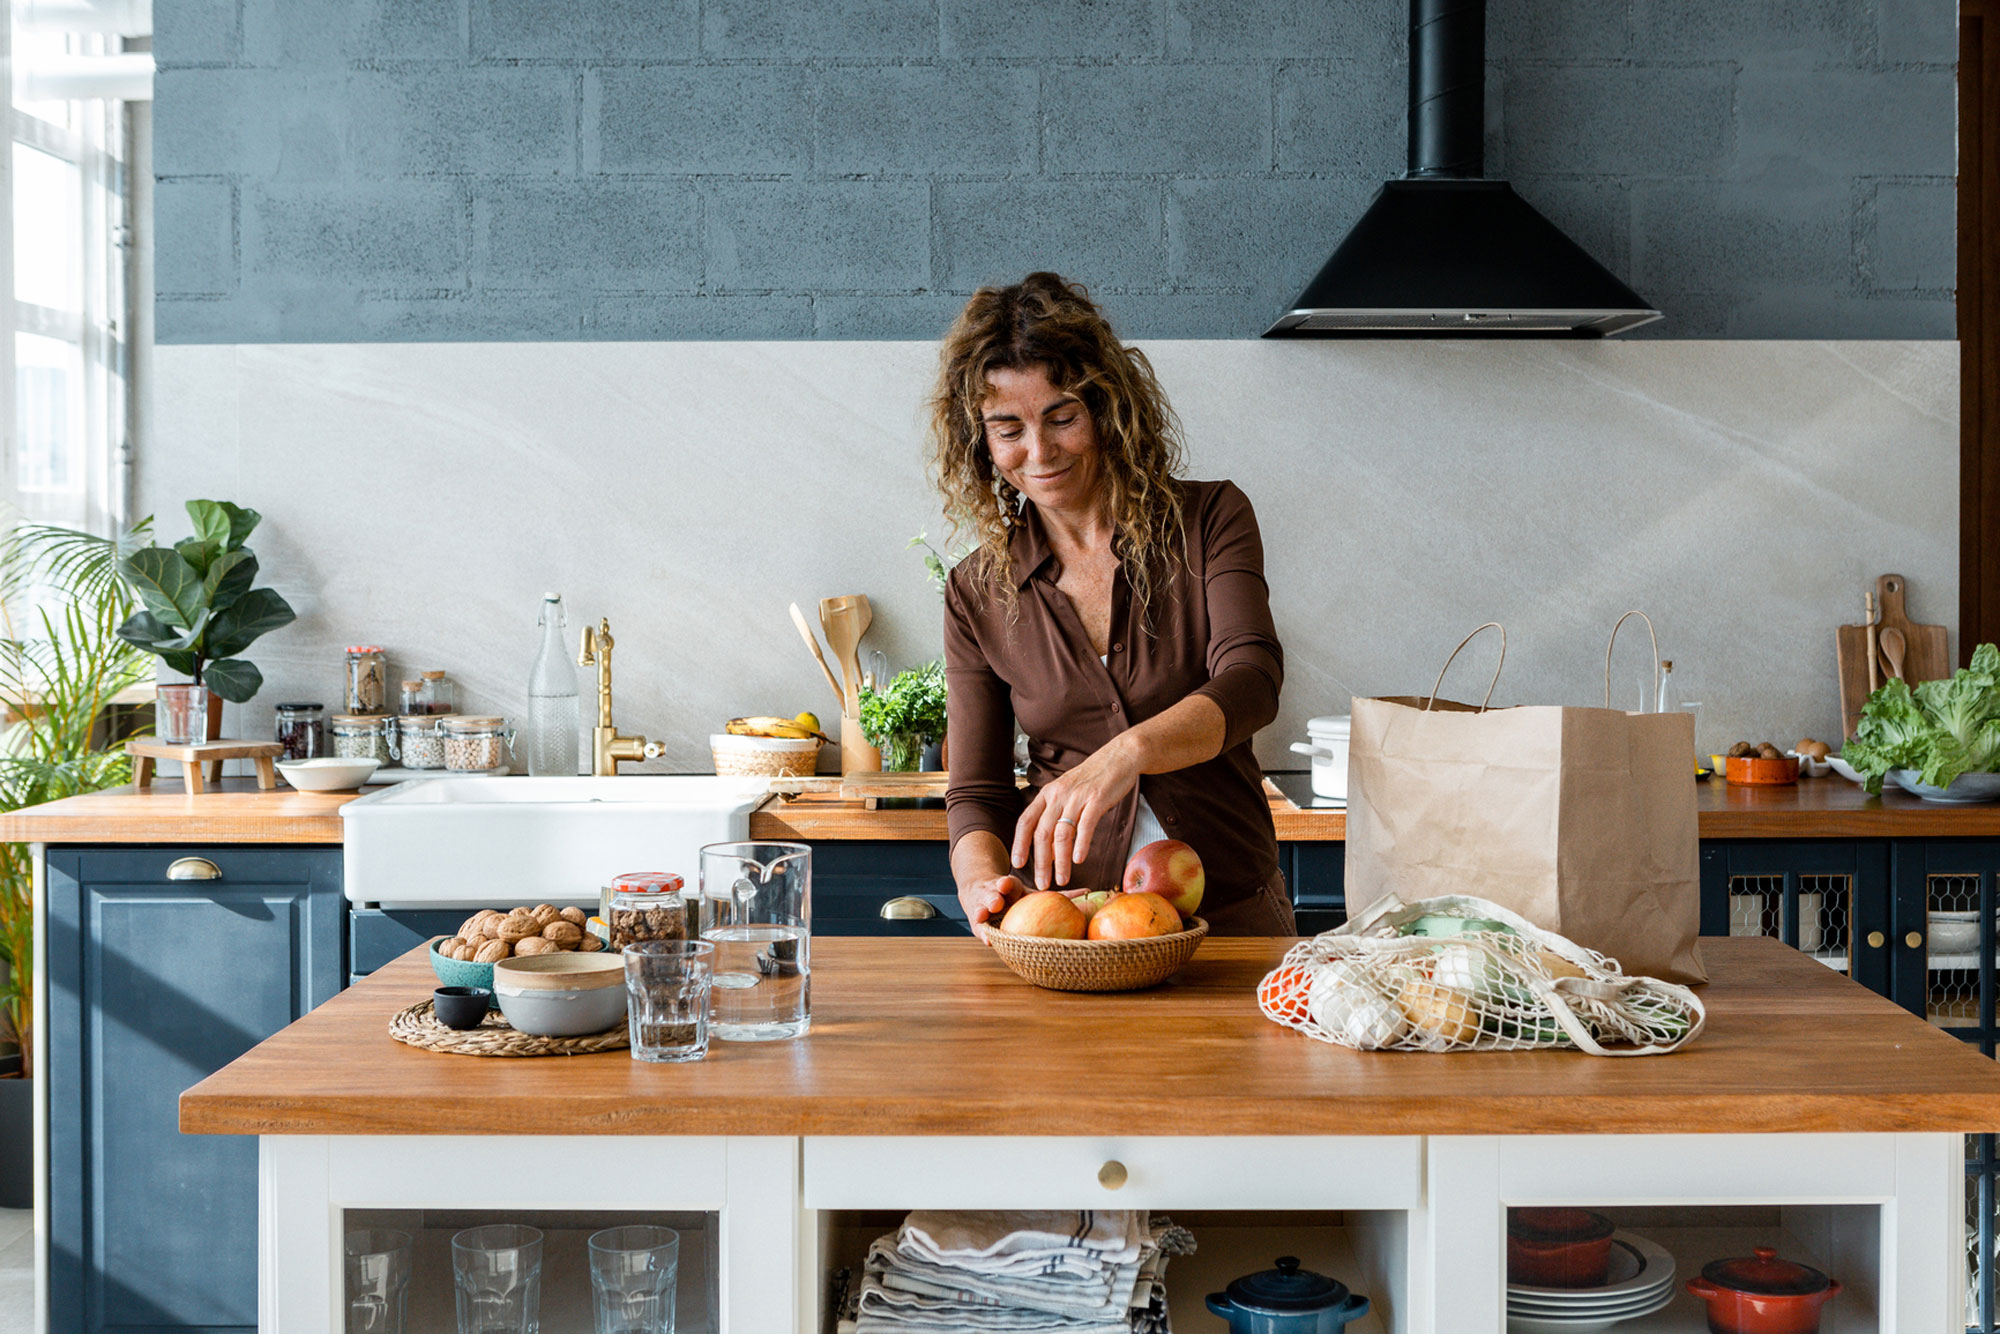 Woman unpacking the groceries in the kitchen